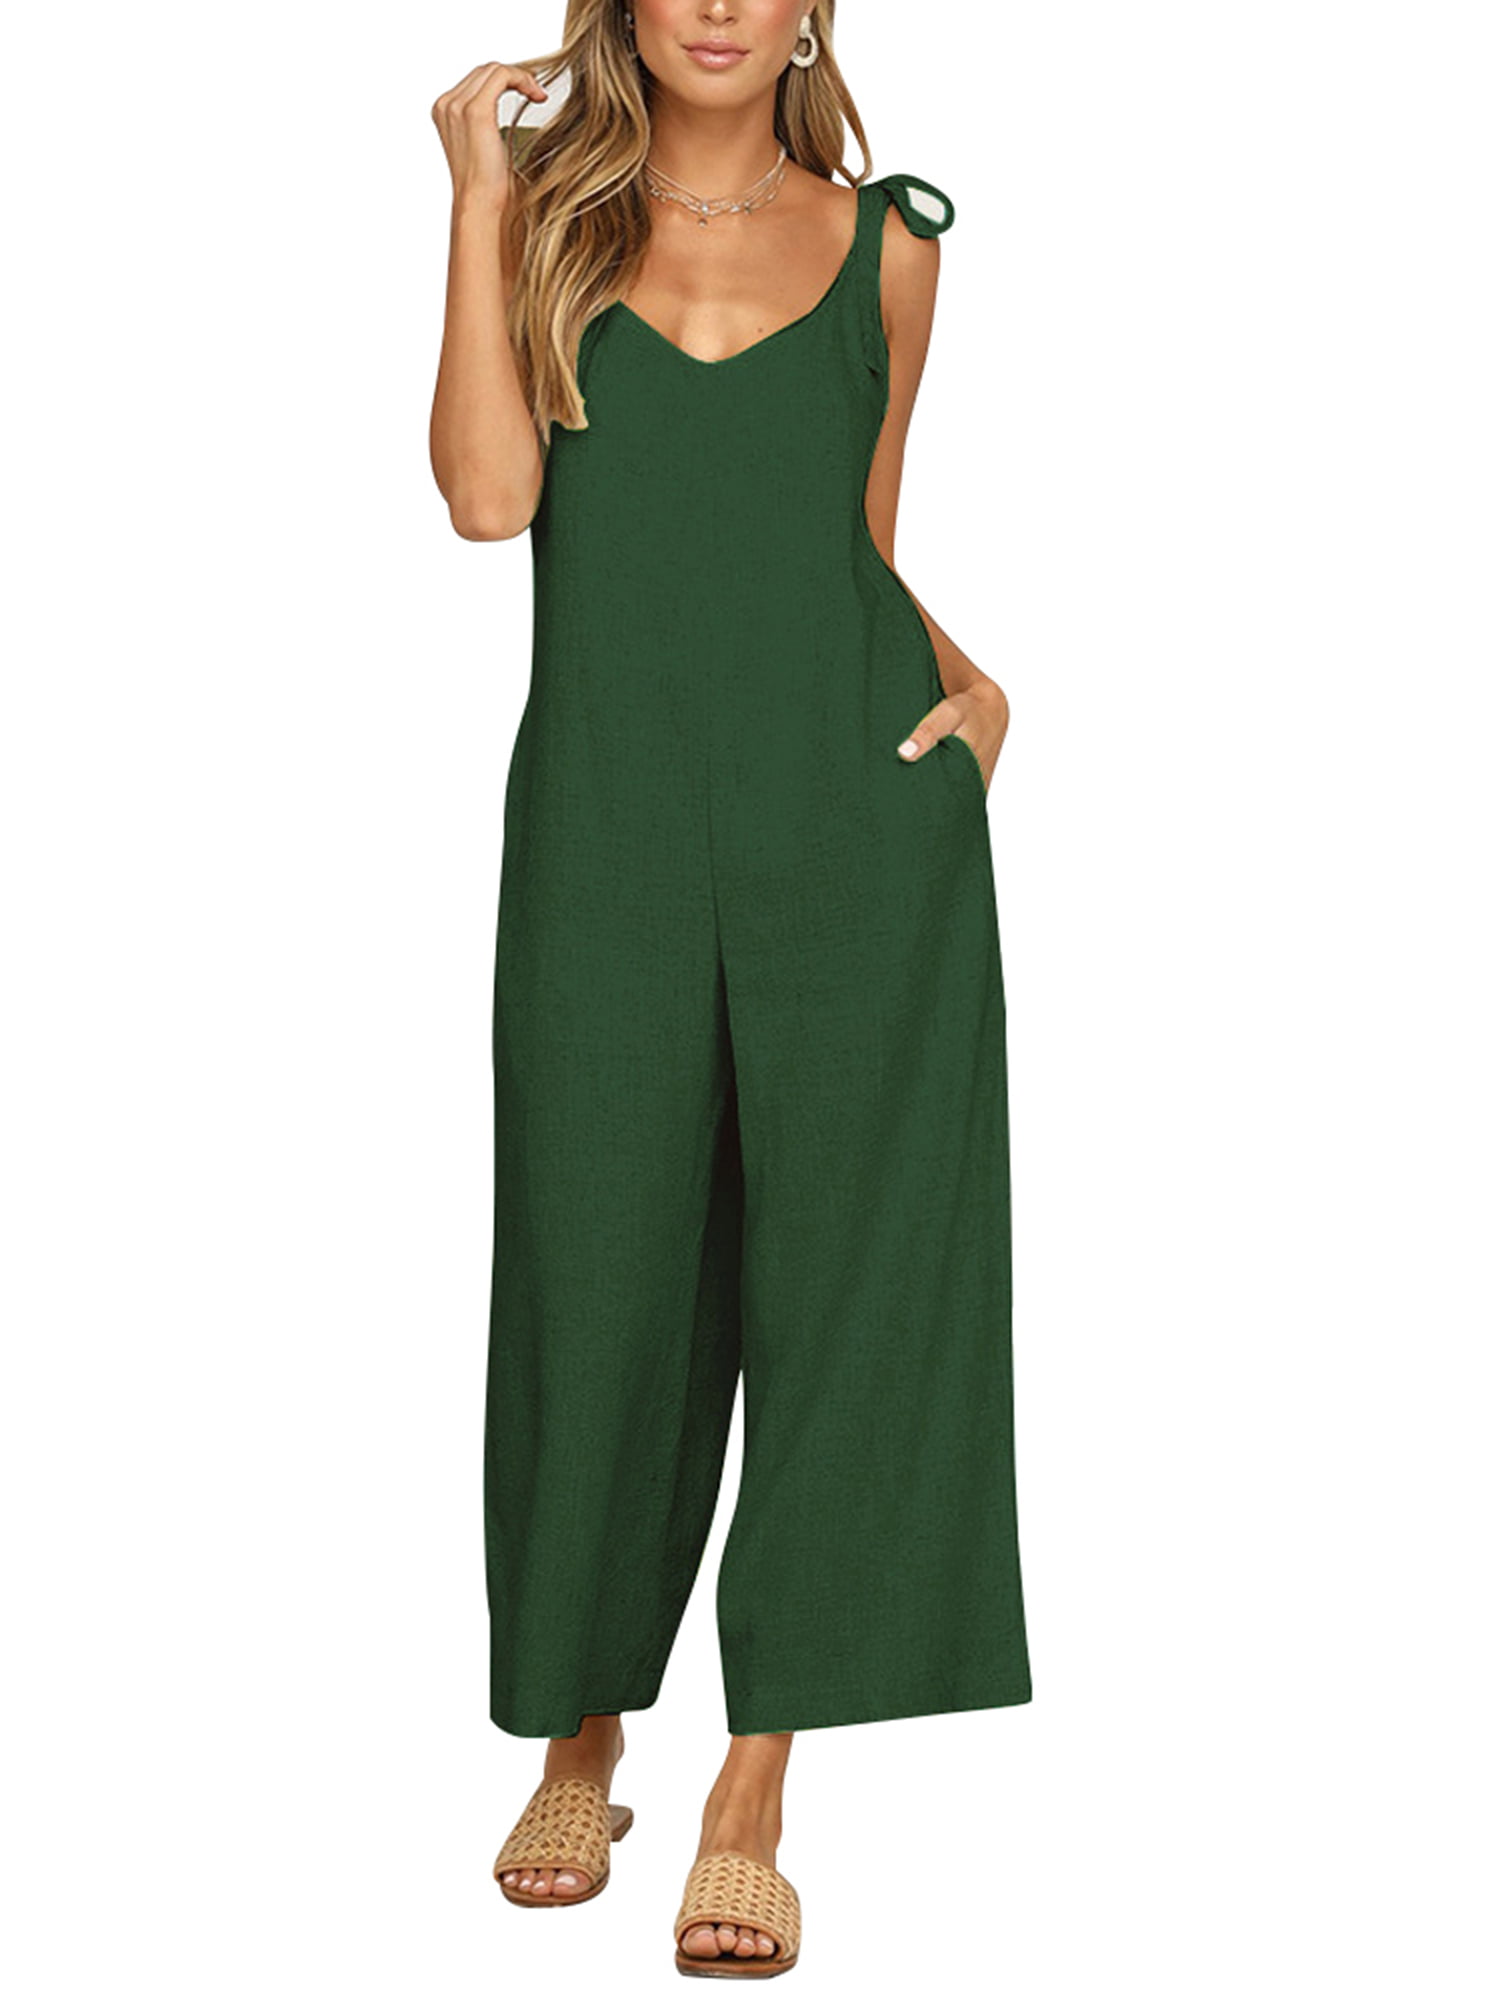 Women Casual O Neck High Waisted Wide Playsuits Beach Jumpsuit with Pockets